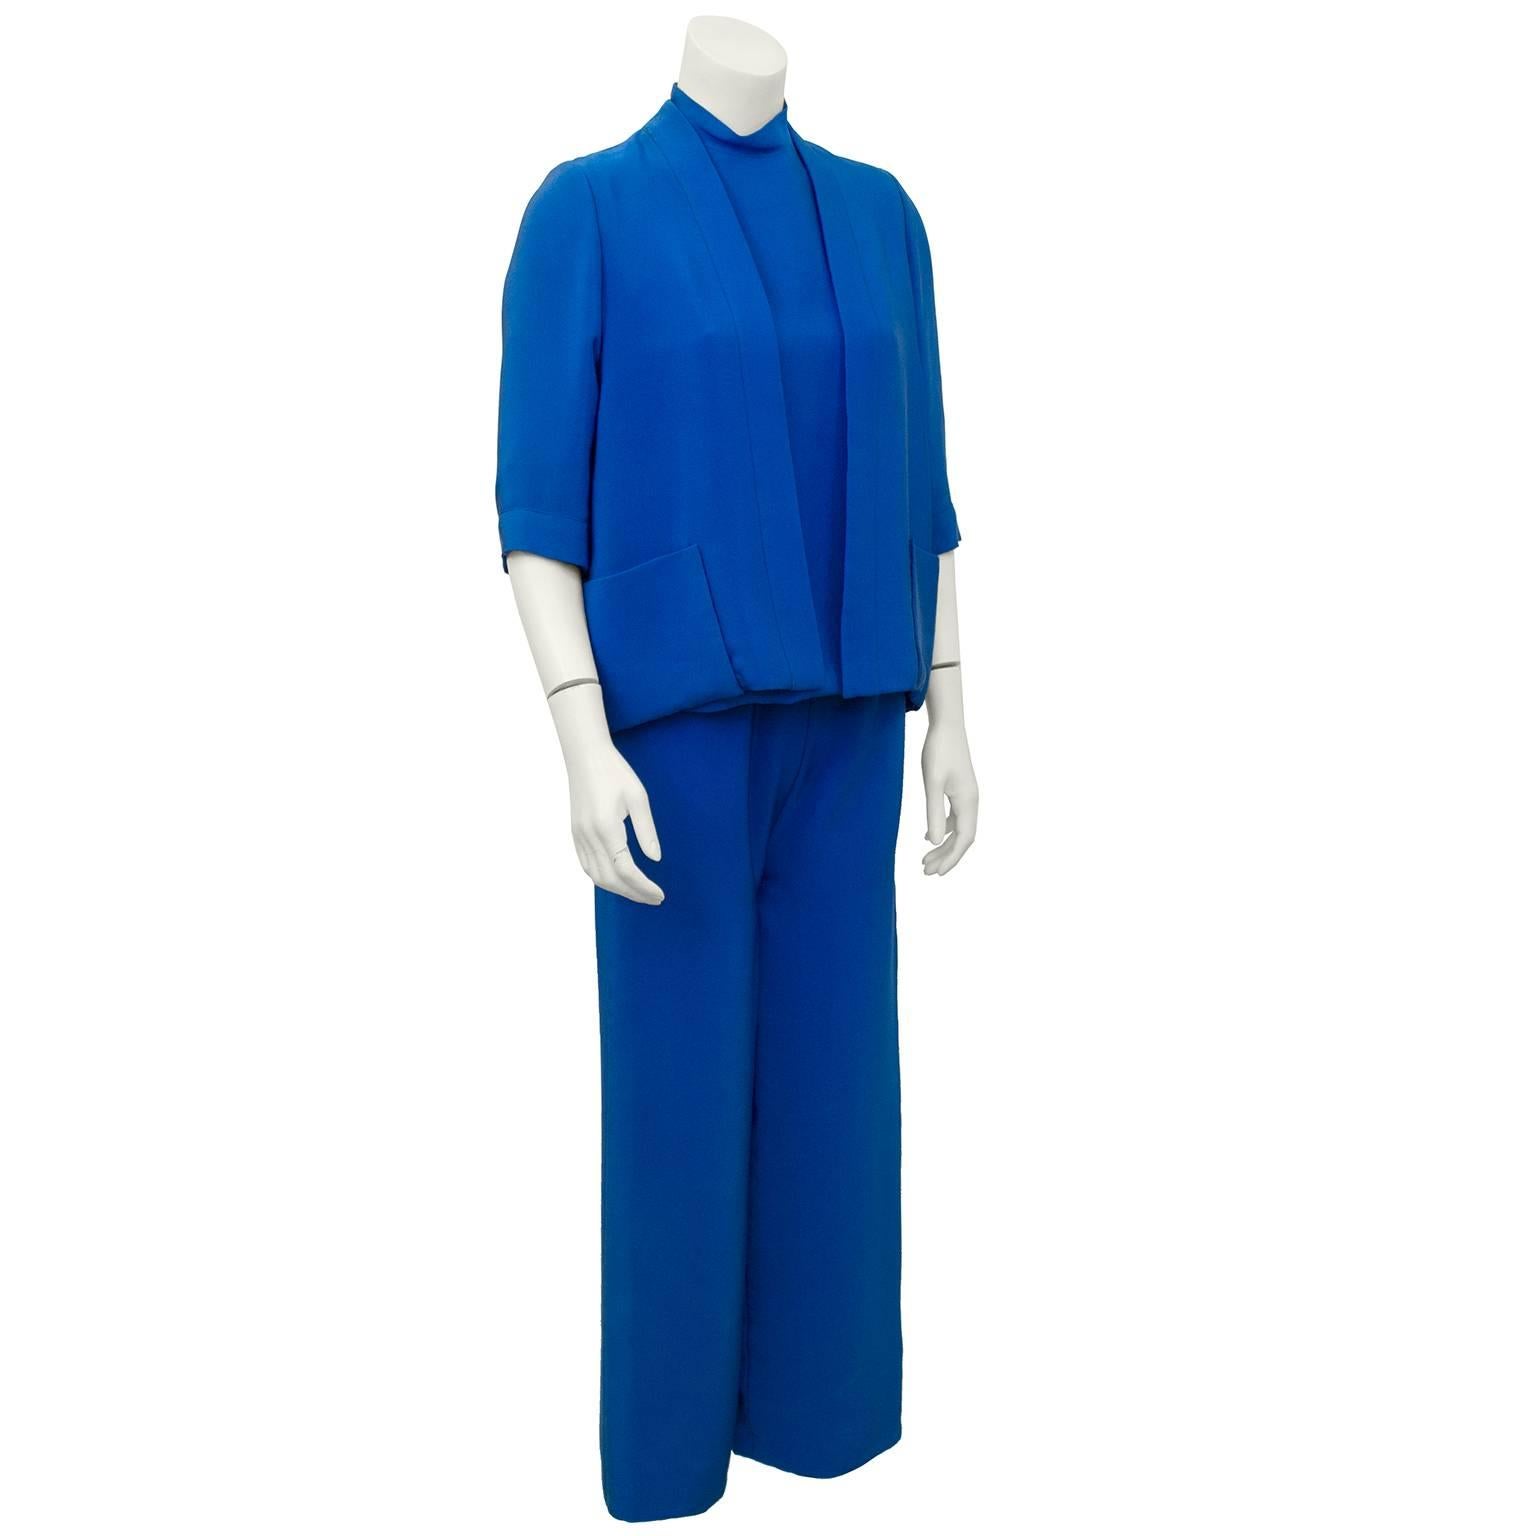 Darling minimalist and quintessential 1960's 3 piece silk ensemble from Normal Norell.  Jacket lis open cardigan style  with 3/4 sleeves and patch pockets. Tops is sleeveless with a mock neck and pants are cut straight and hit just above the ankles.